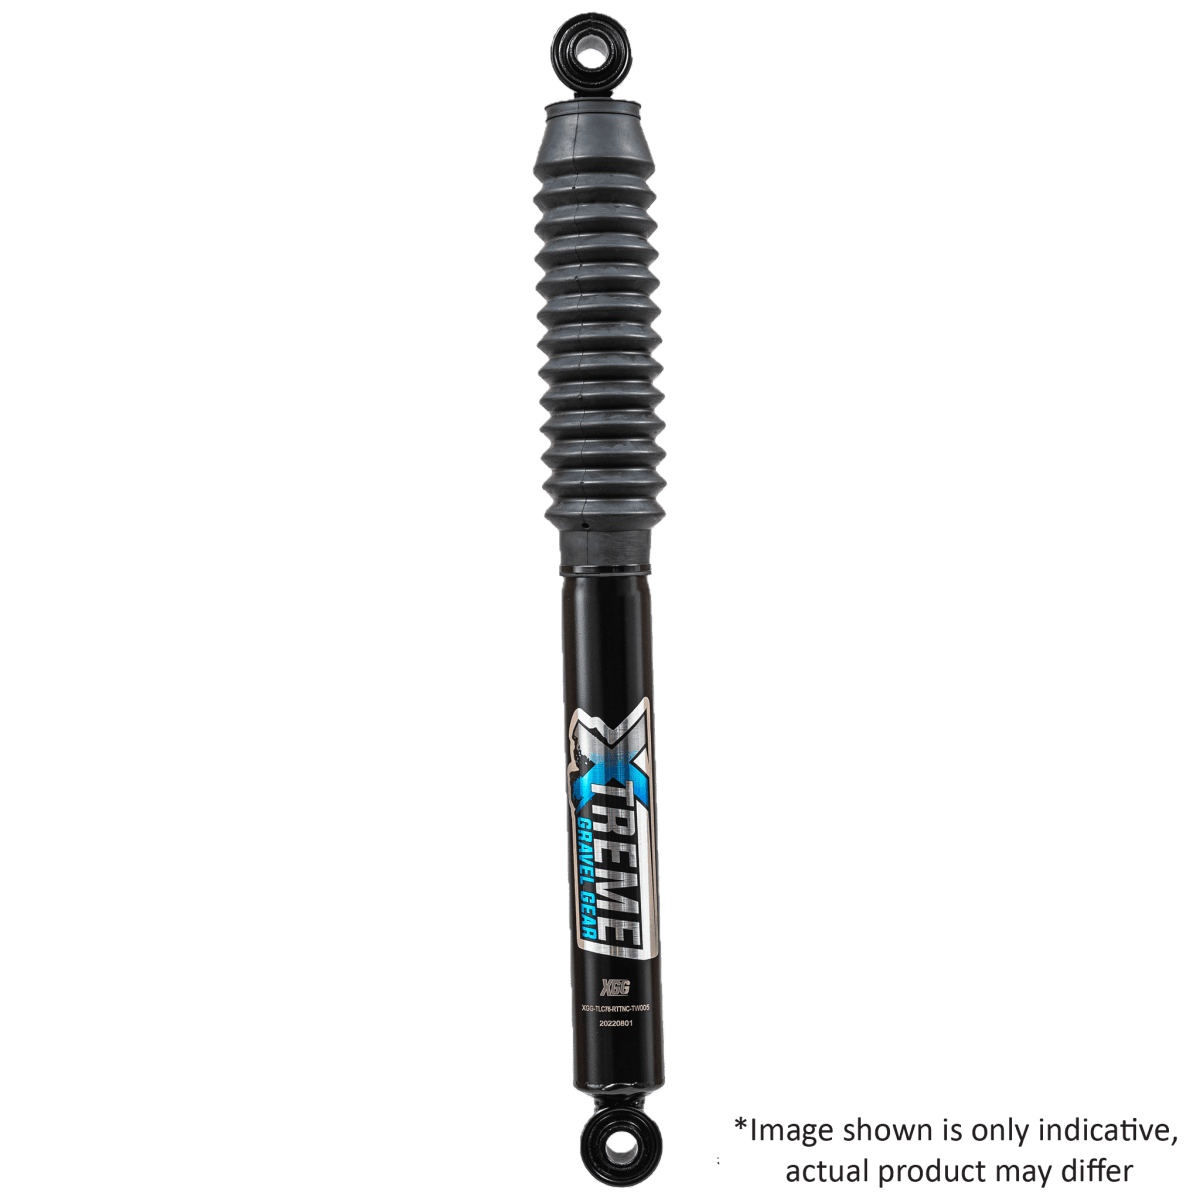 XGG Mountain Series REAR Shocks Nitro to suit a Nissan Pathfinder D40 2005+ - NZ Offroader